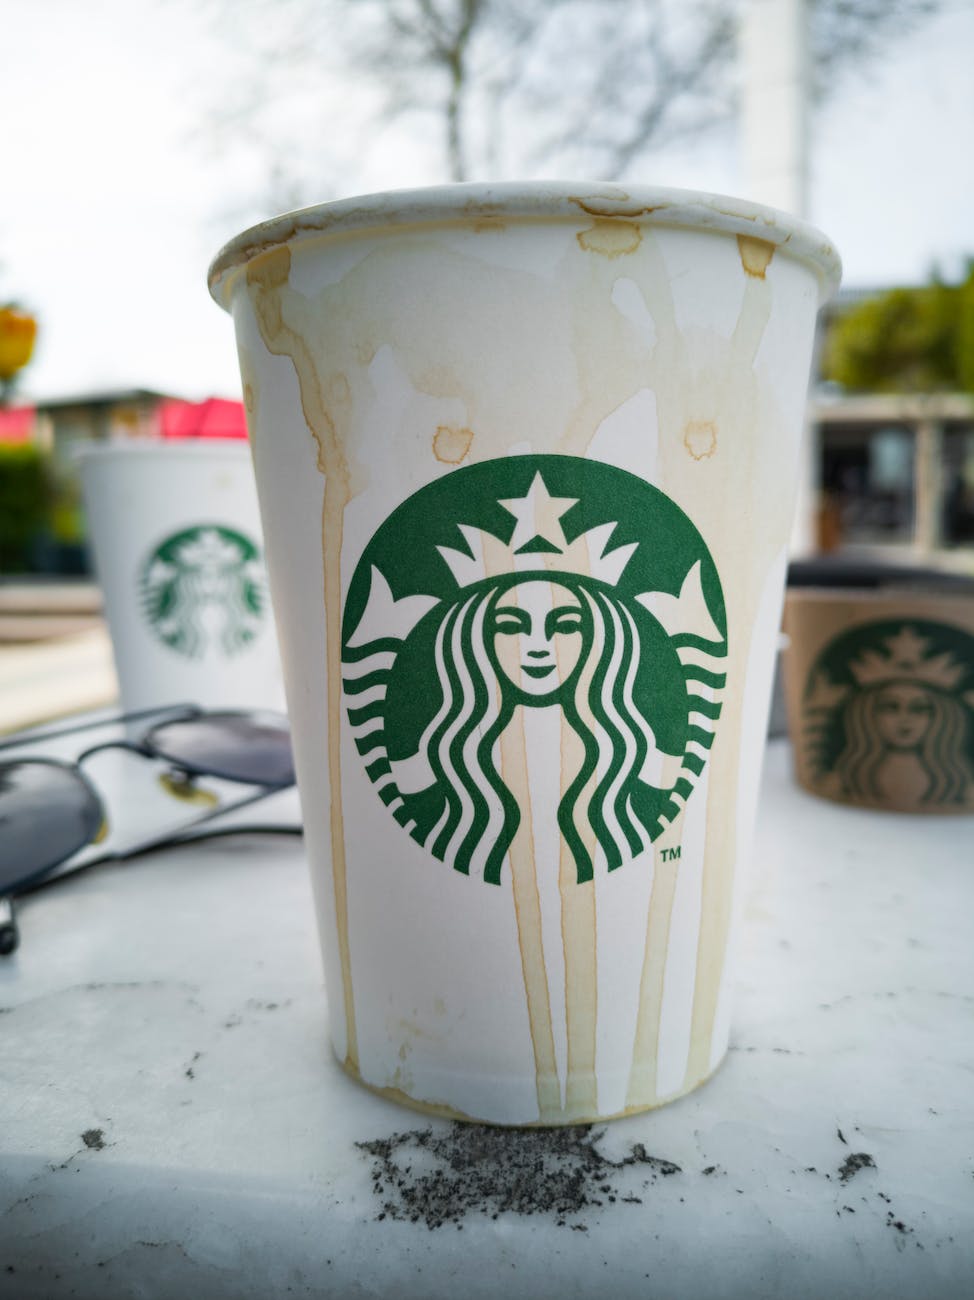 close up photo of starbucks disposable cup